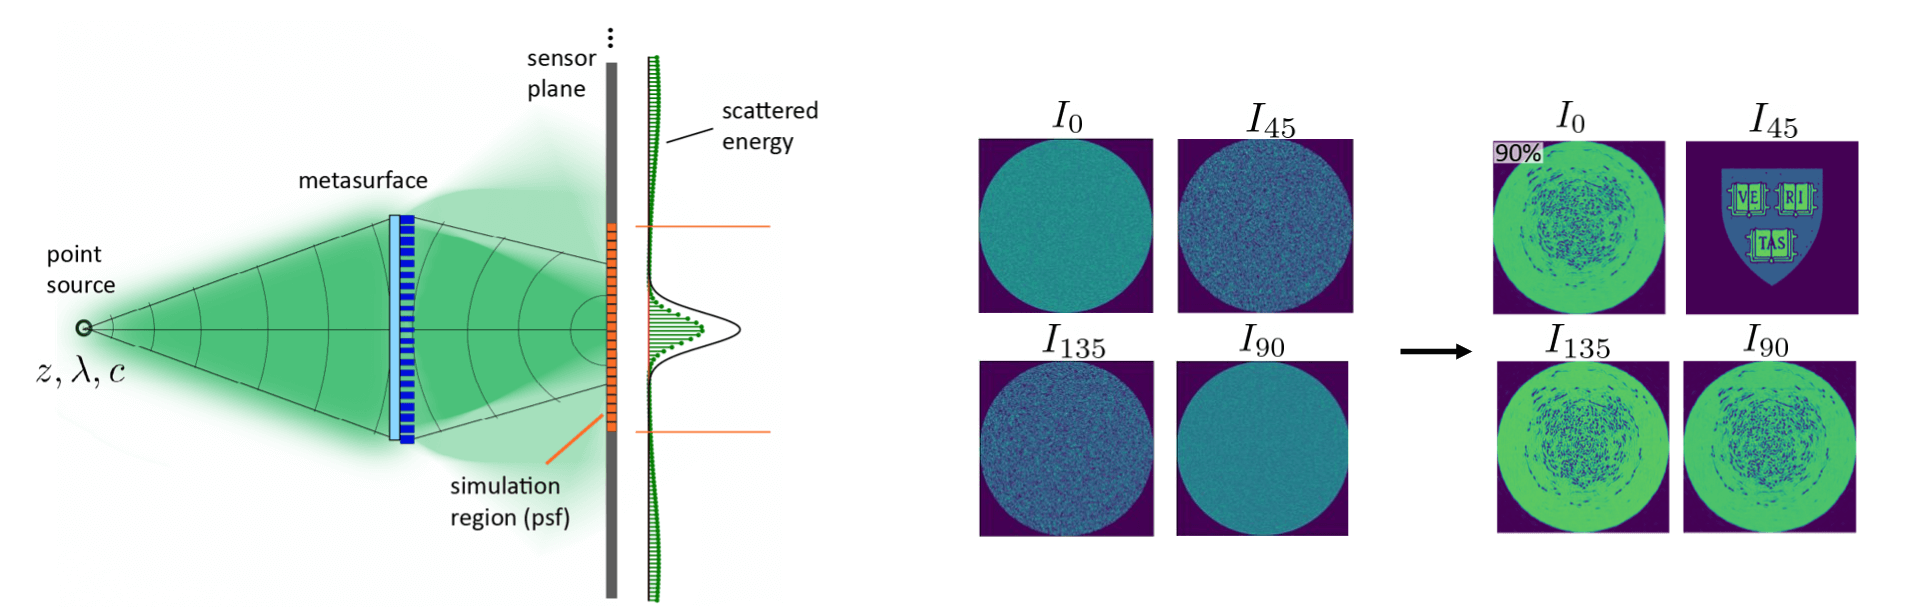 Visual depiction of the channel capacity for polarization-modulated, multi-coded imaging system with output polarizers at 0, 45, 90, and 135 degrees